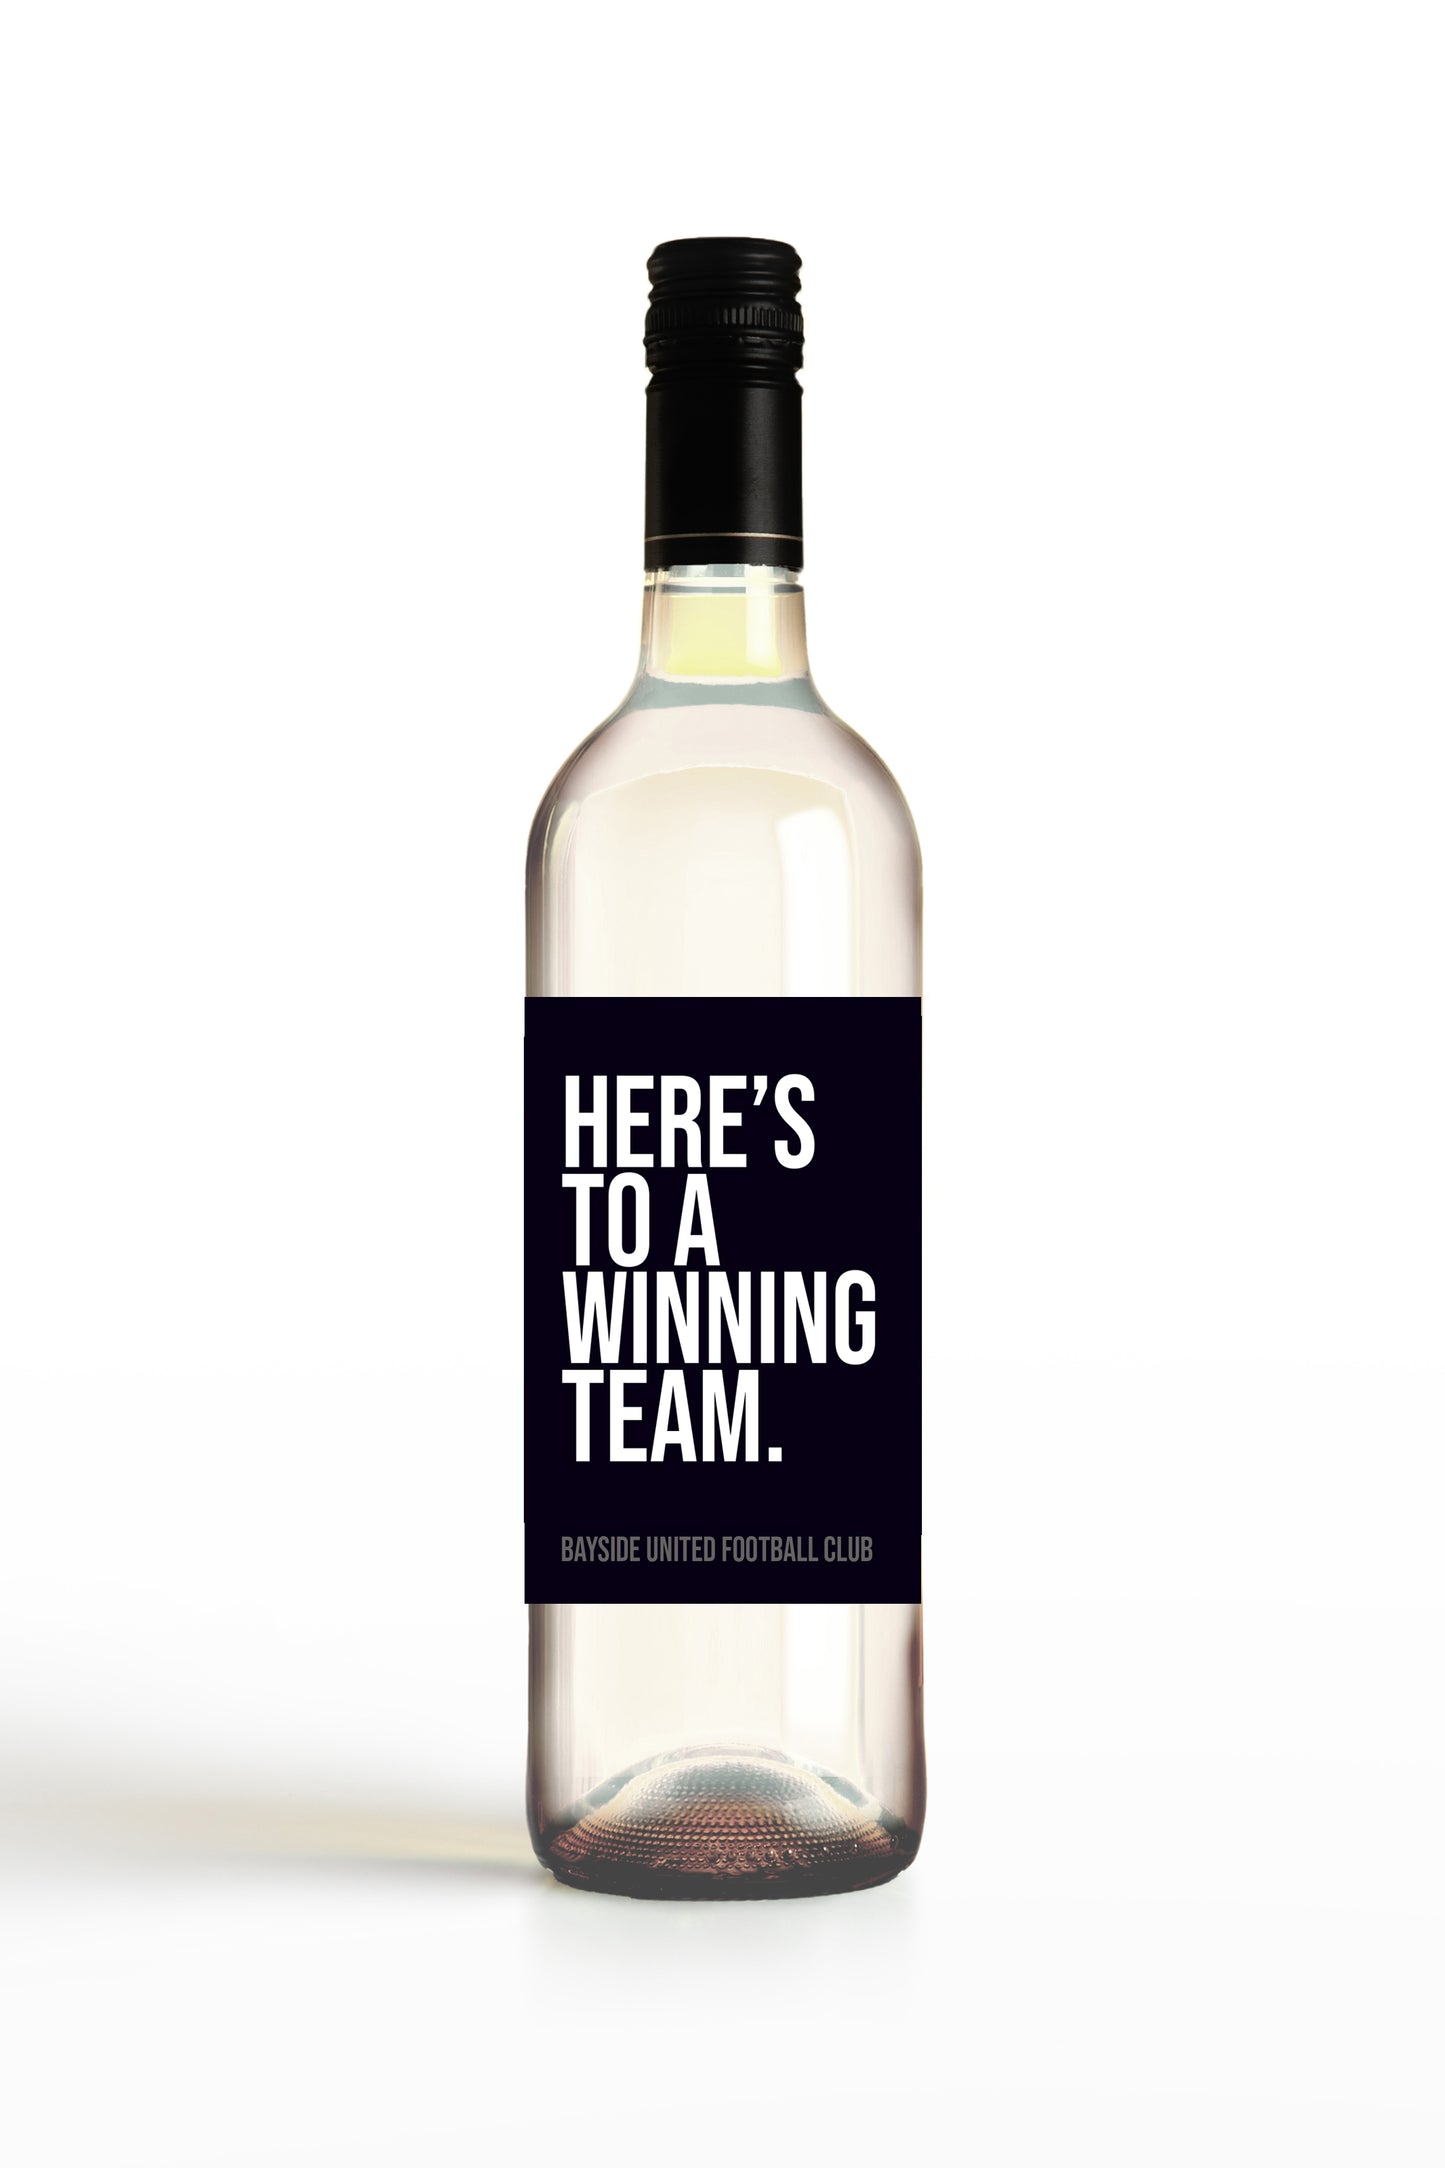 Here's To A Winning Team.